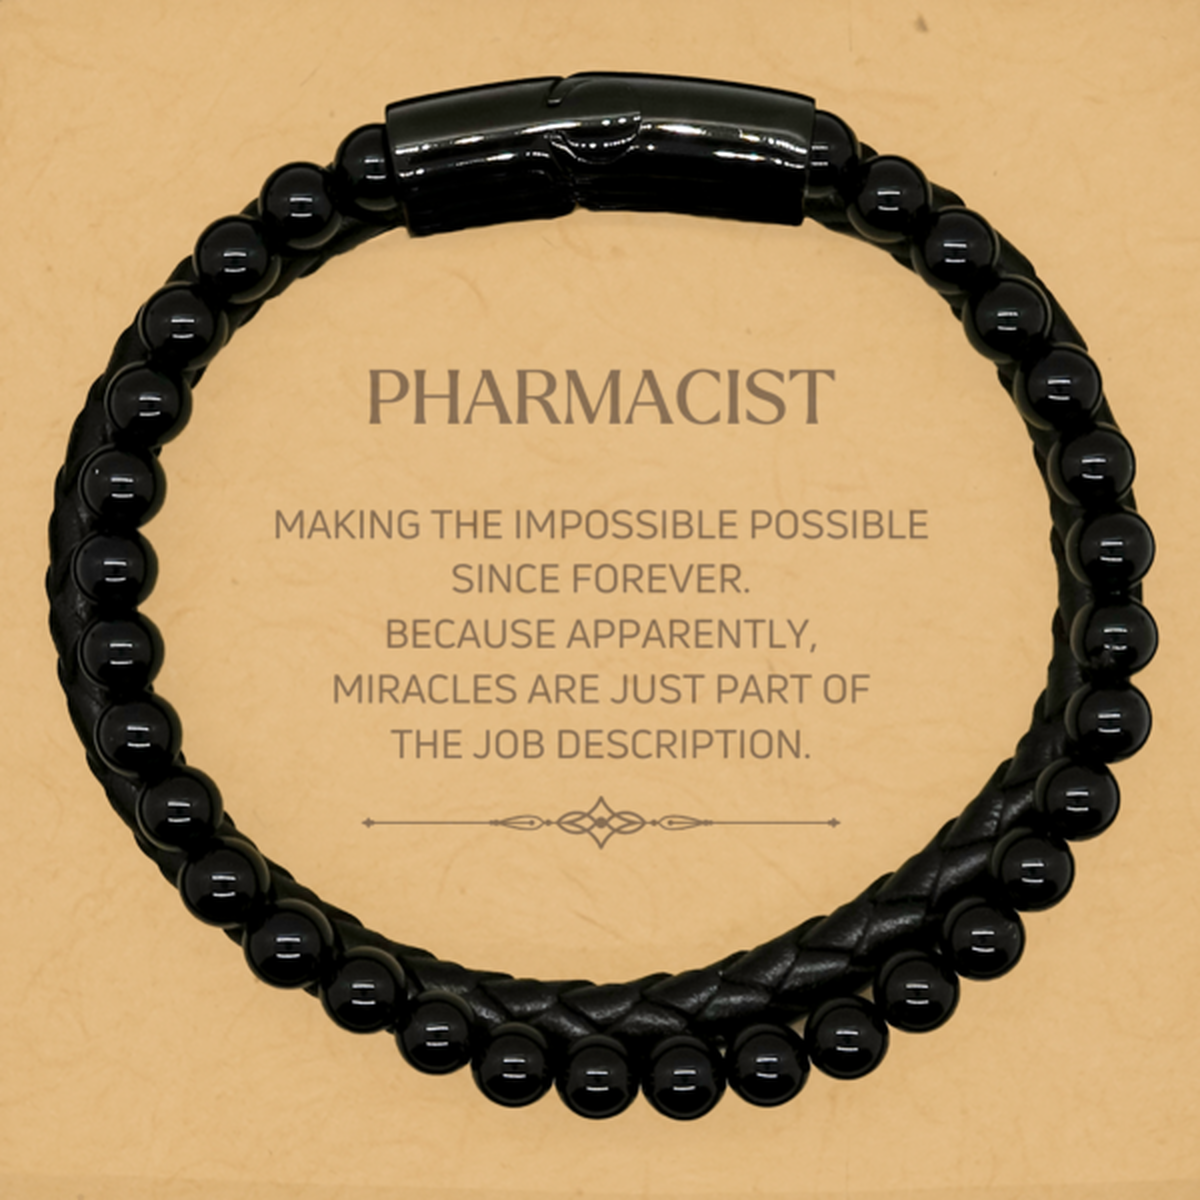 Funny Pharmacist Gifts, Miracles are just part of the job description, Inspirational Birthday Stone Leather Bracelets For Pharmacist, Men, Women, Coworkers, Friends, Boss